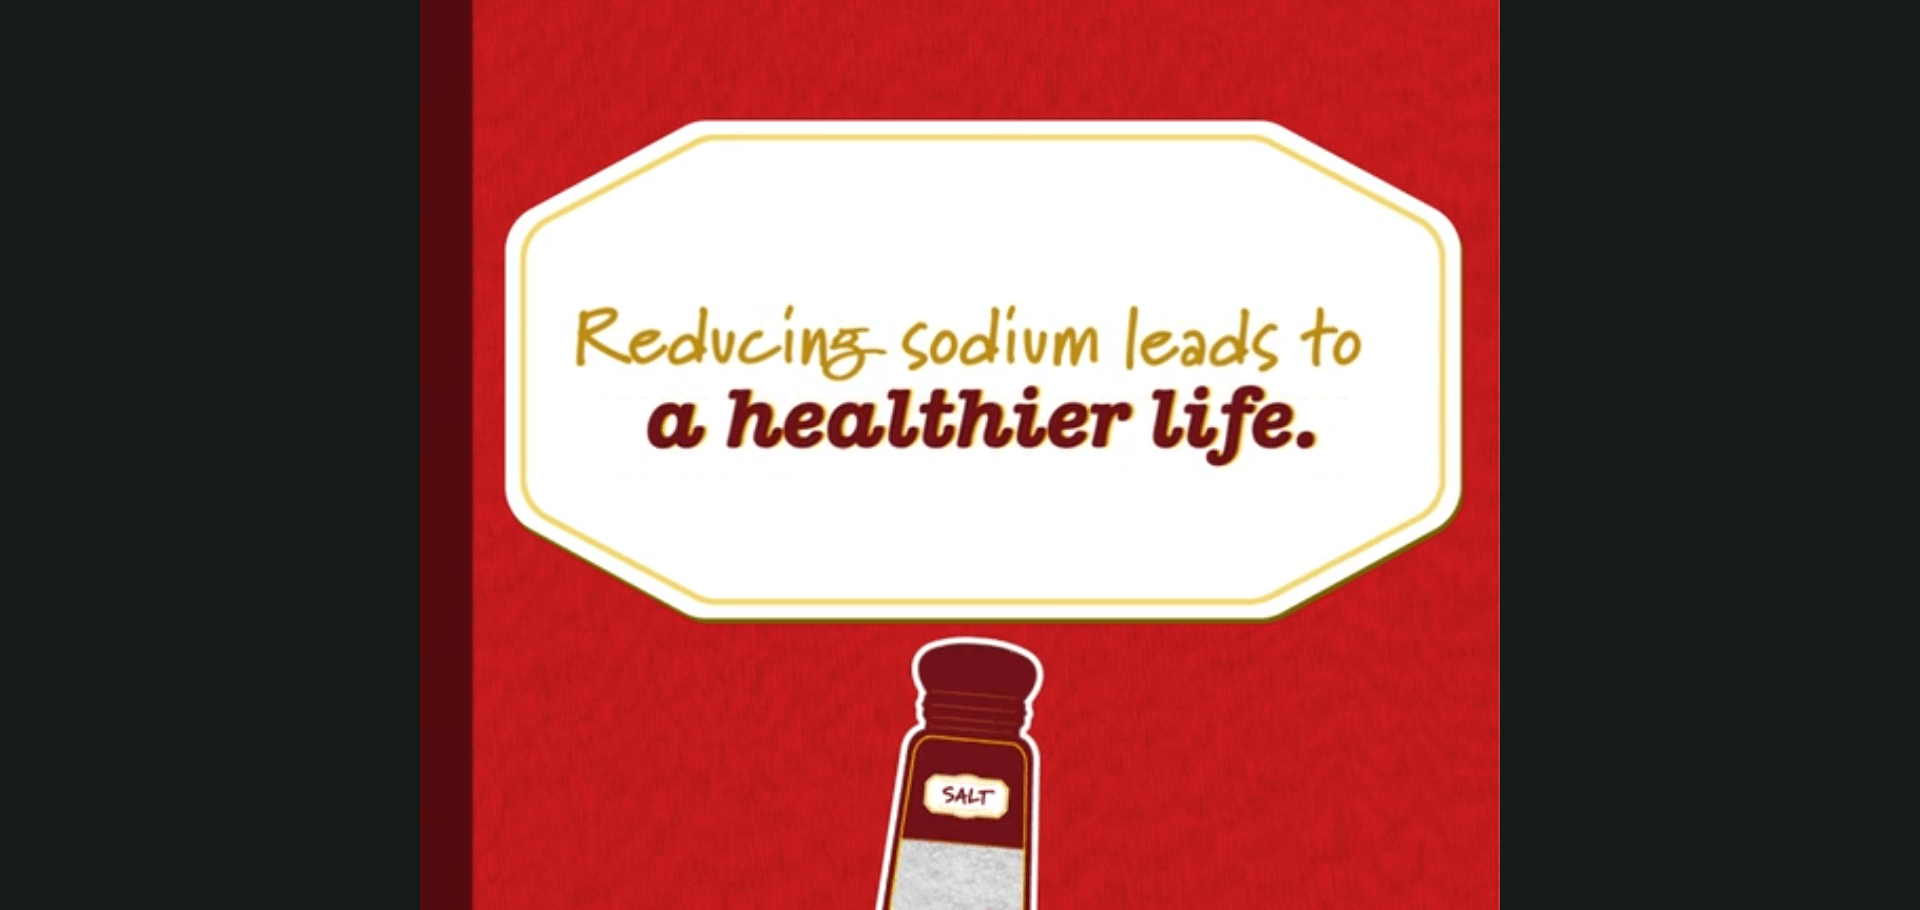 Reducing sodium leads to a healthier life.